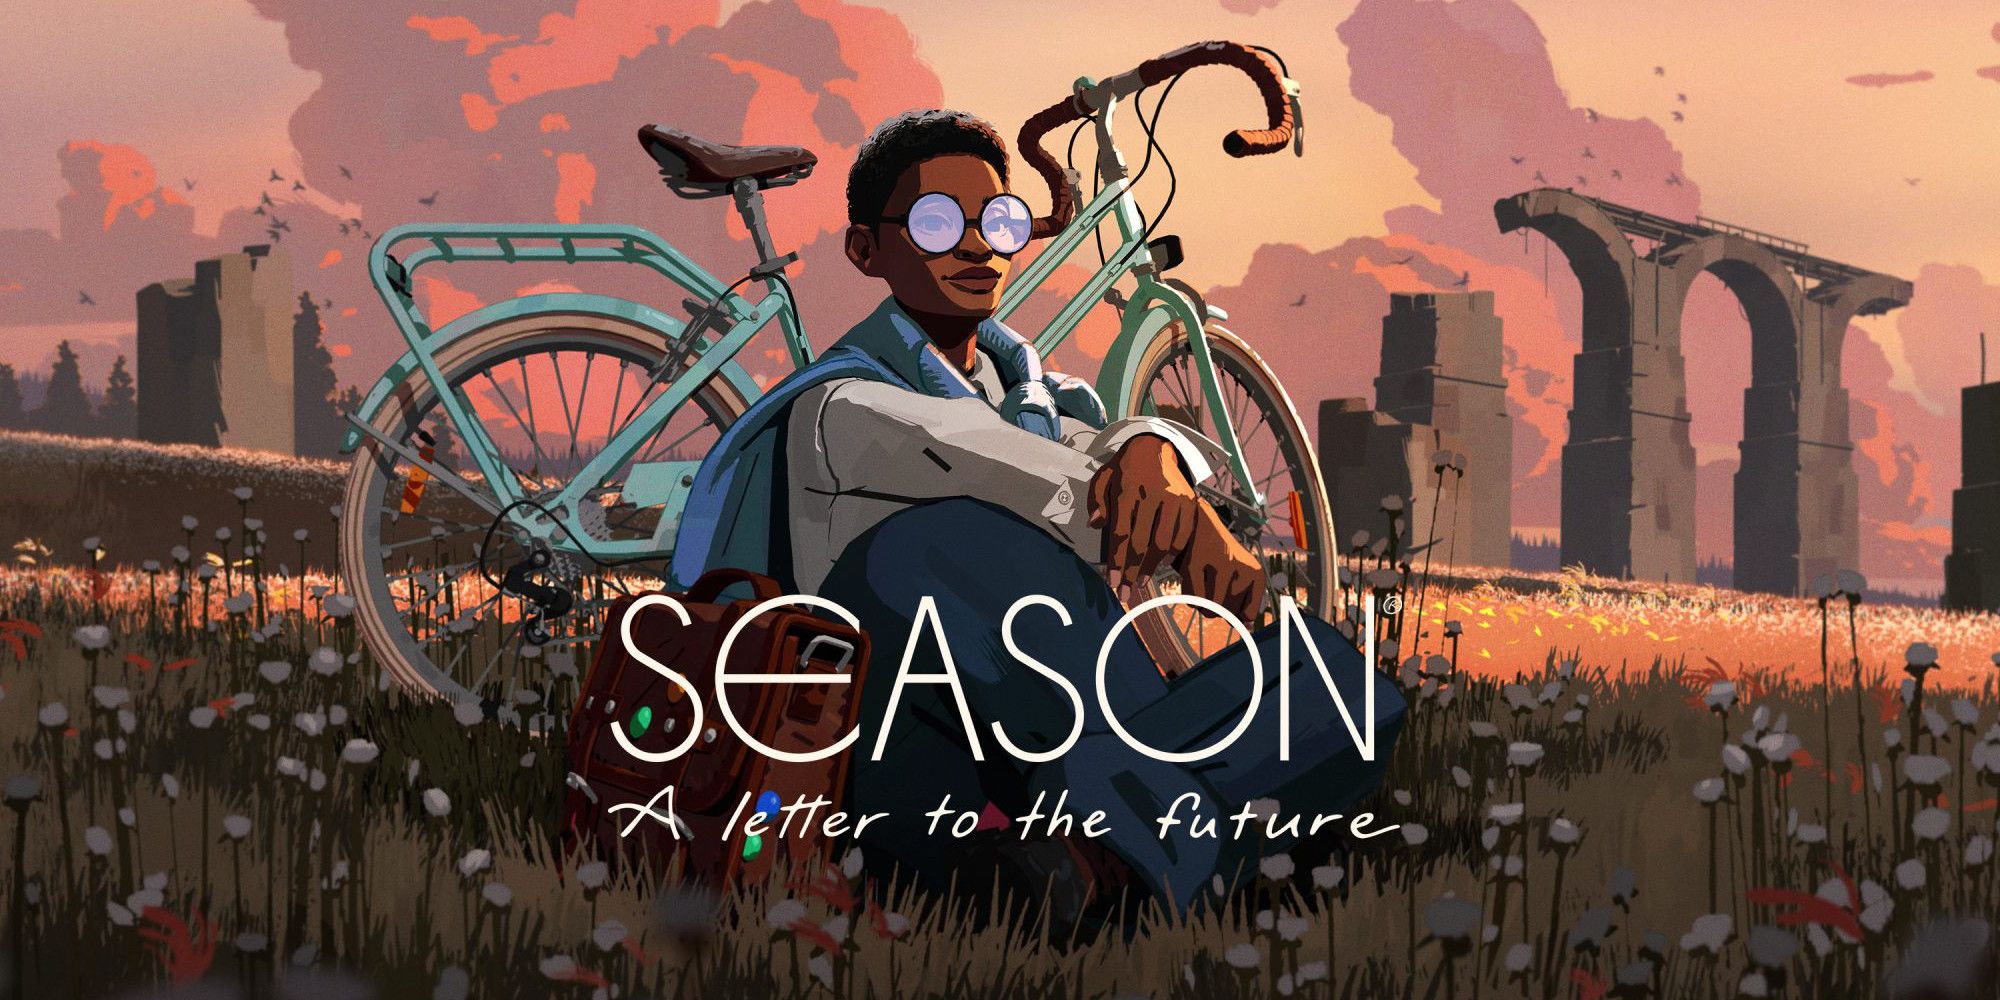 season-a-letter-to-the-future-review-heartfelt-records-of-a-time-lost